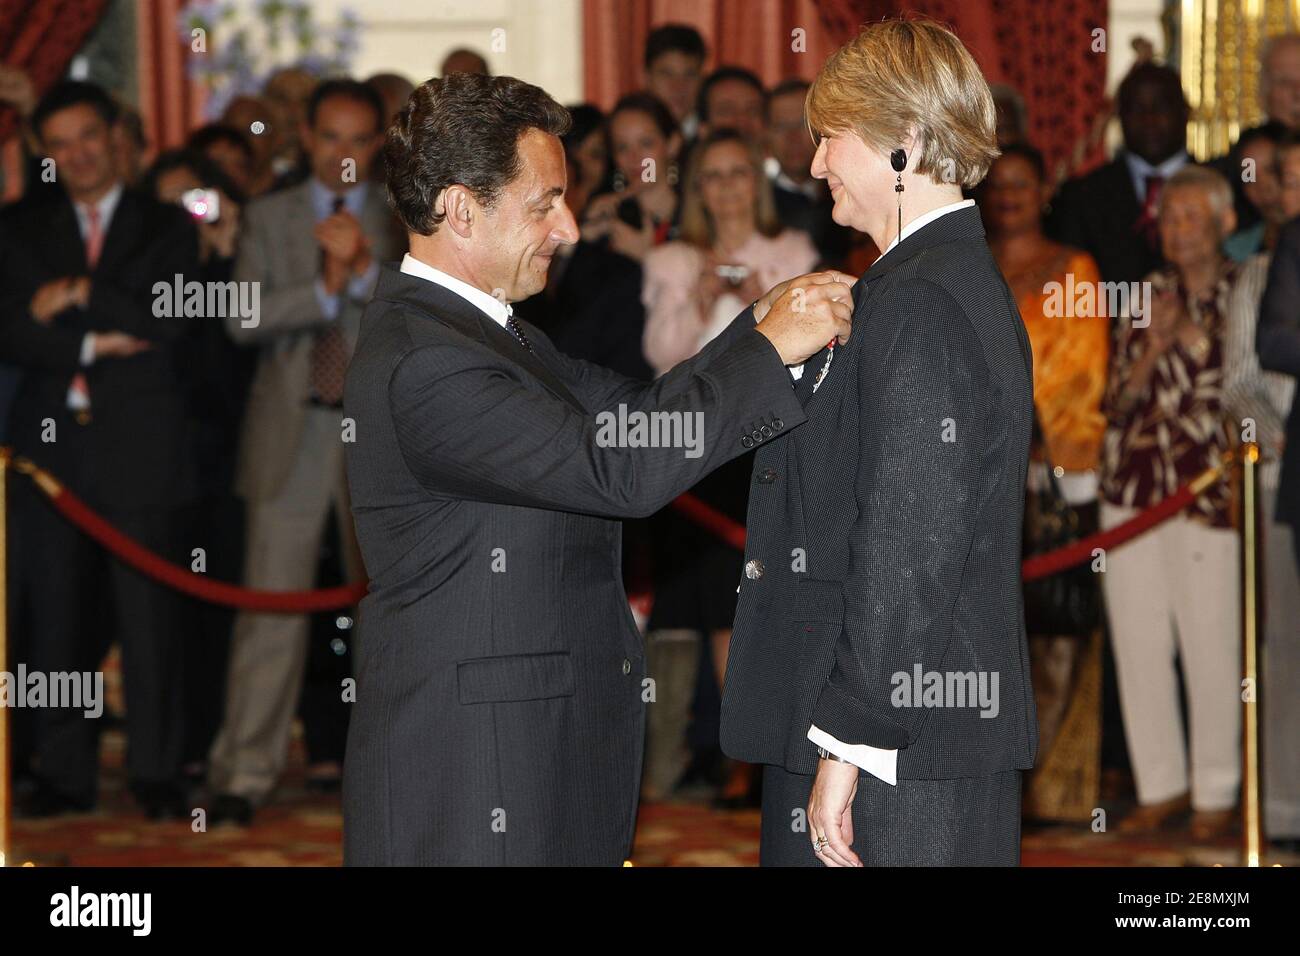 French president Nicolas Sarkozy awards Sophie Devedjian, head of cabinet of Anthony's mayor as officer of France's Legion d'Honneur order (legion of honnor) at the Elysee Palace in Paris, France on July 13, 2007. Photo by Bernard Bisson/ABACAPRESS.COM Stock Photo